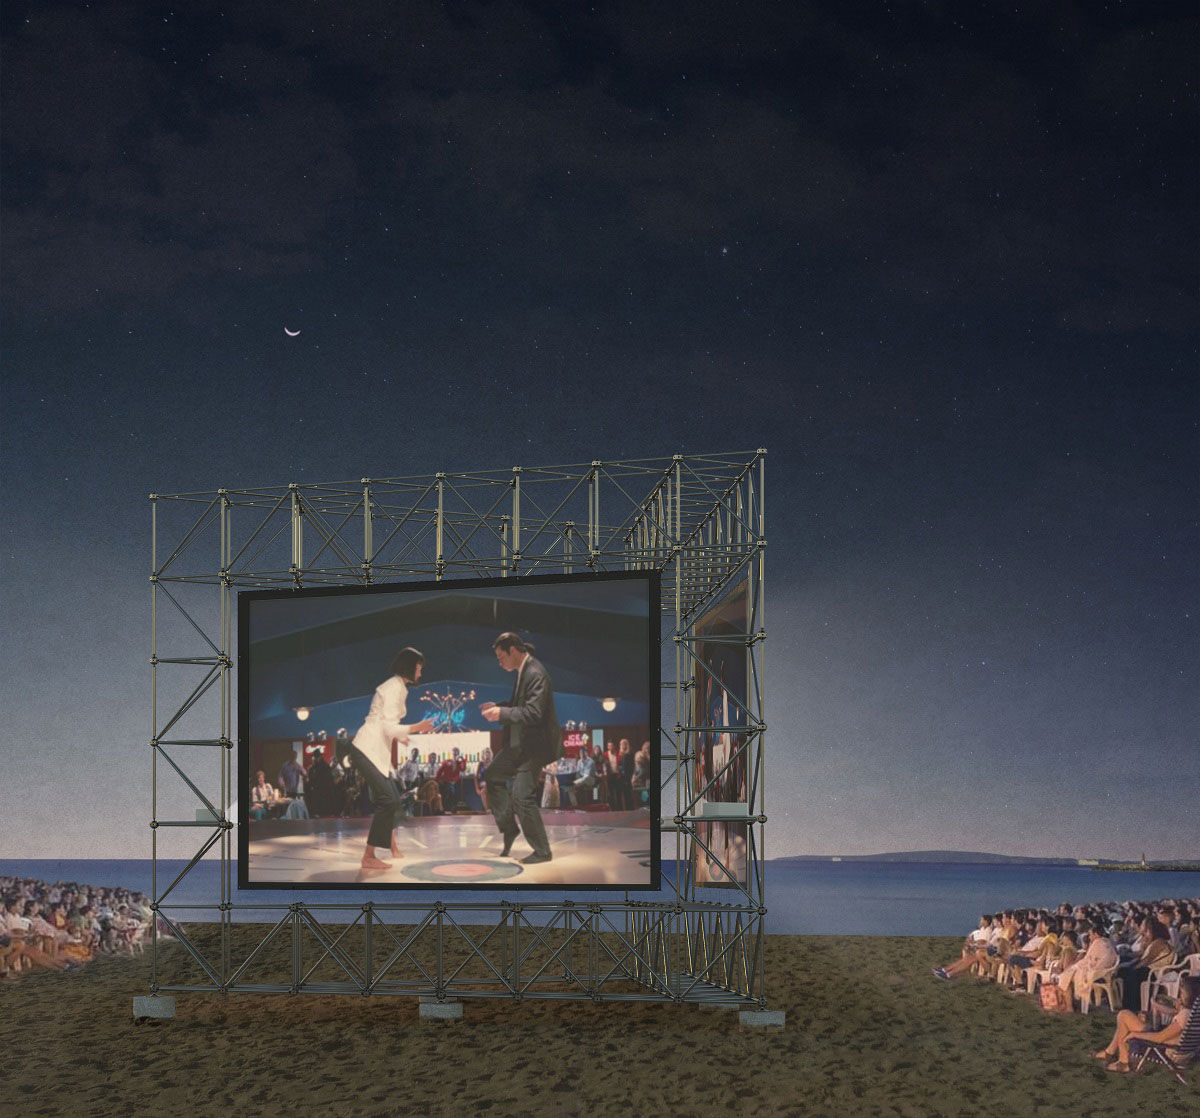 Winners Announced: Cannes Temporary Cinema Design Competition